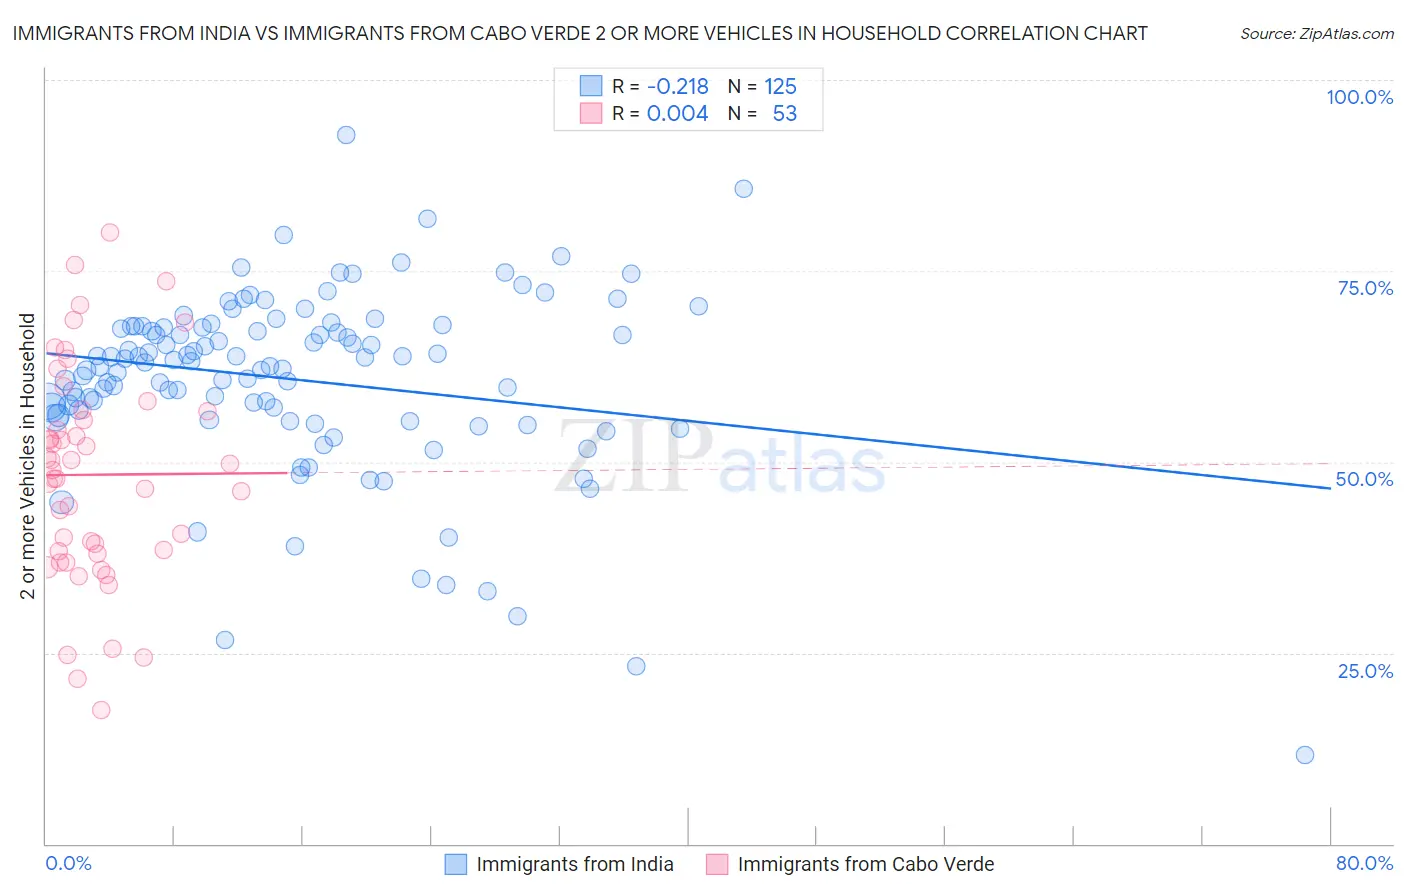 Immigrants from India vs Immigrants from Cabo Verde 2 or more Vehicles in Household